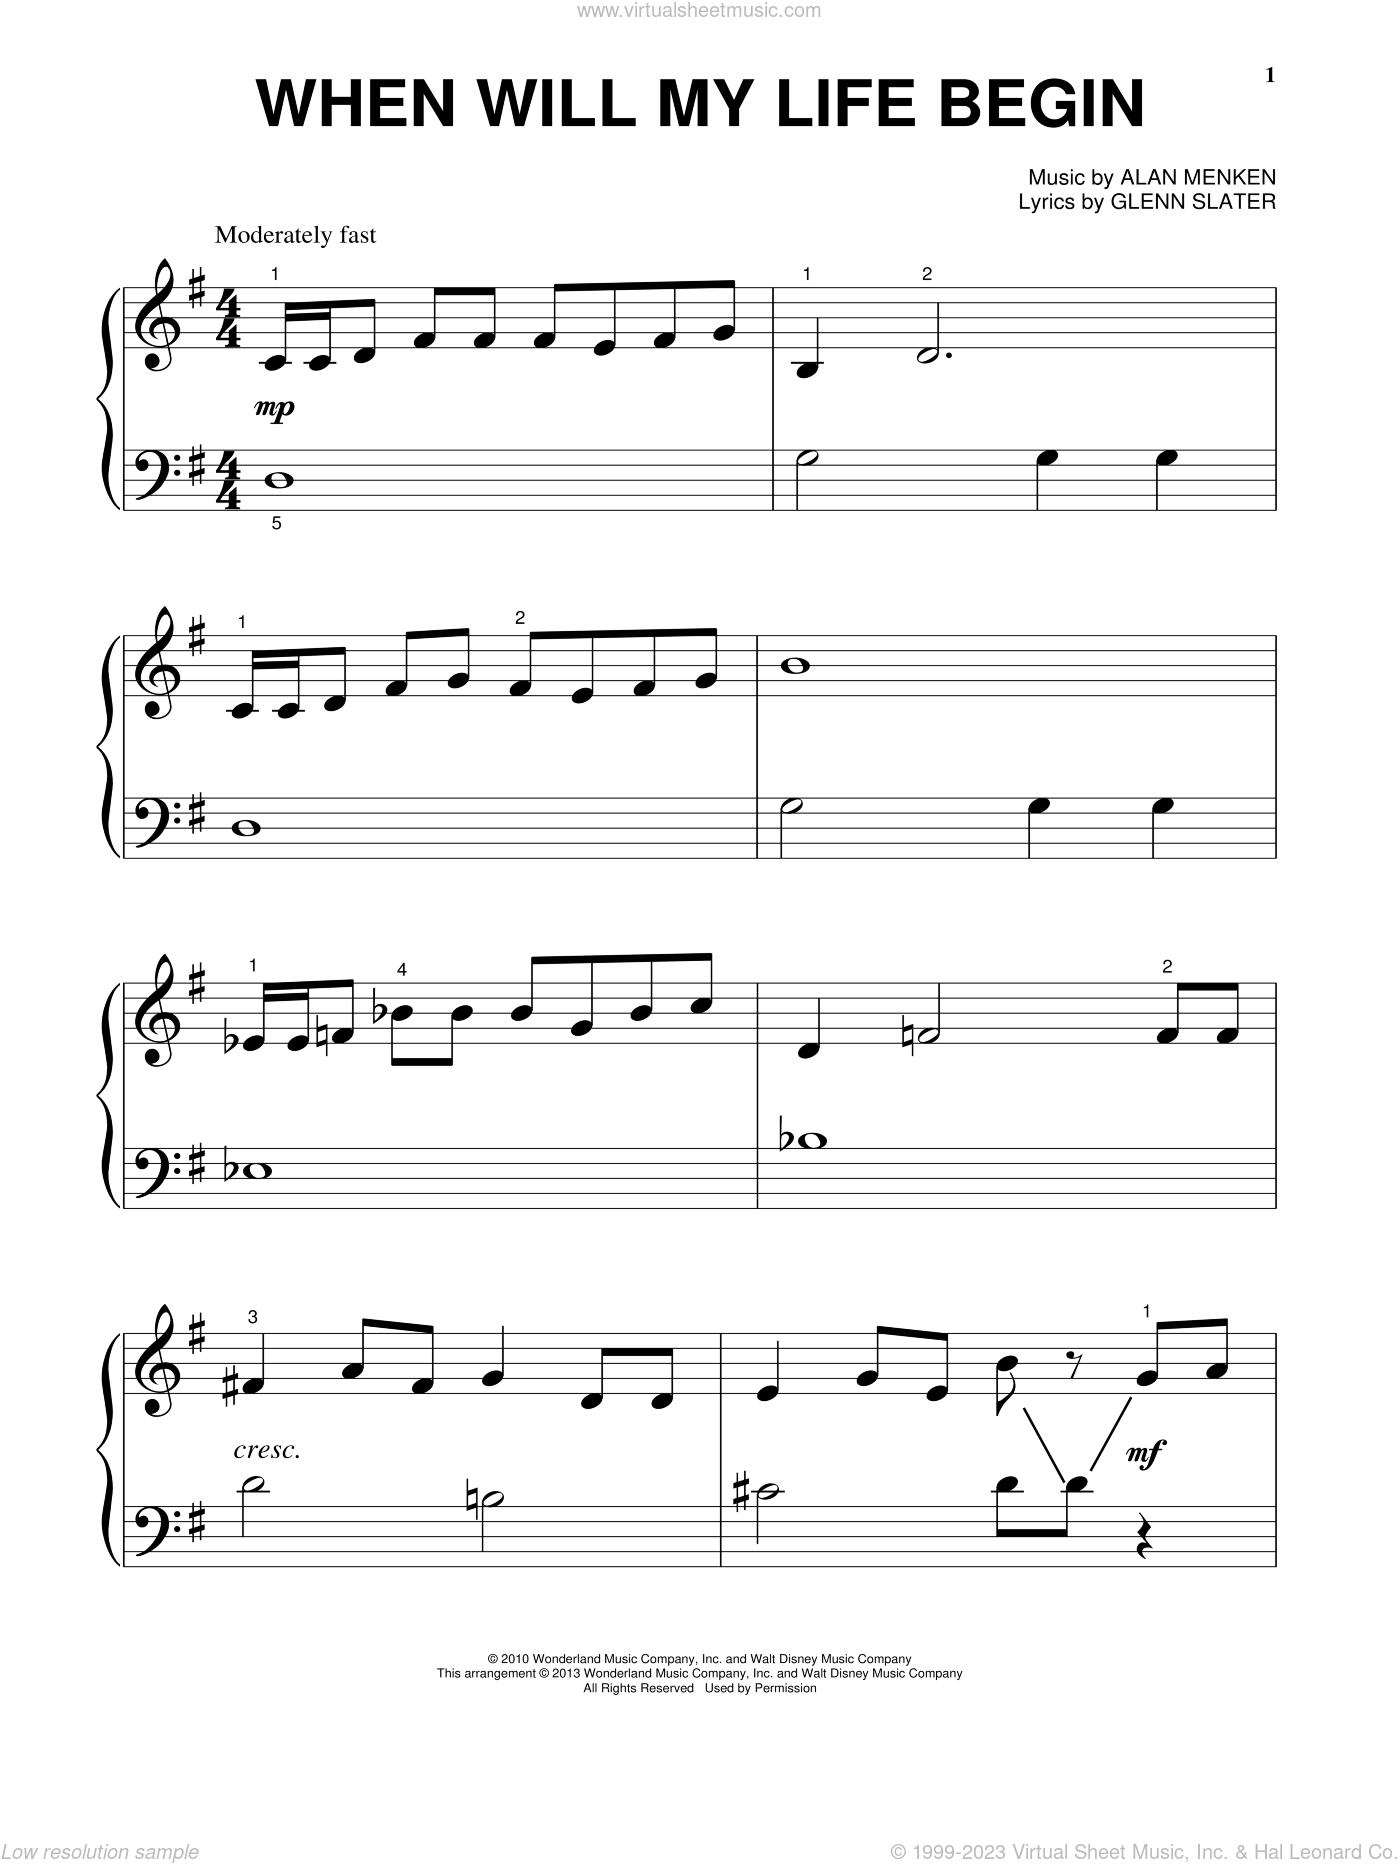 Menken - When Will My Life Begin? (from Tangled) sheet music for piano